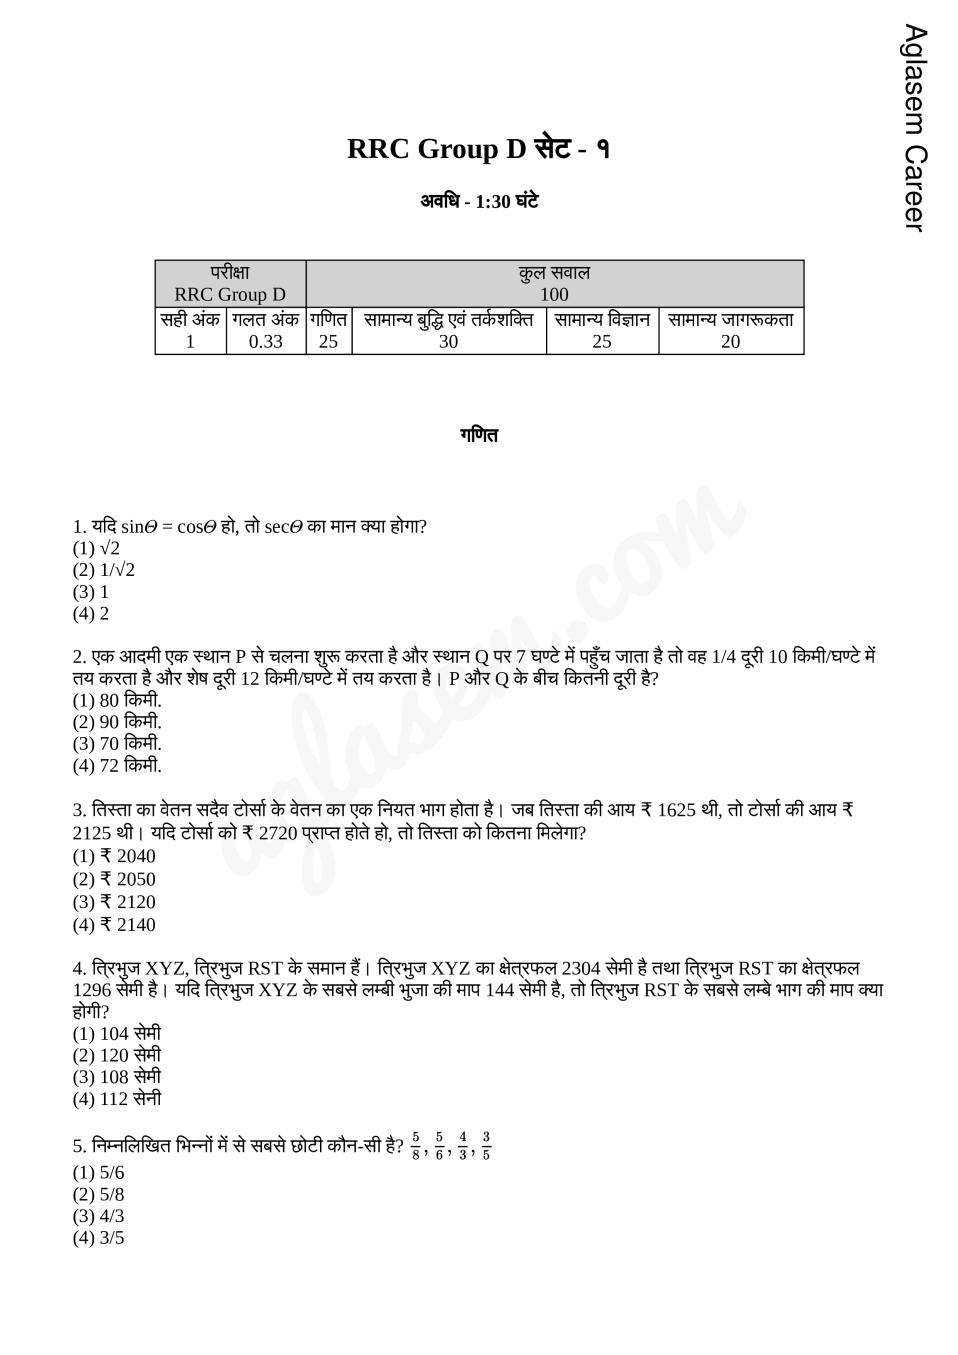 rrb group d important question in hindi